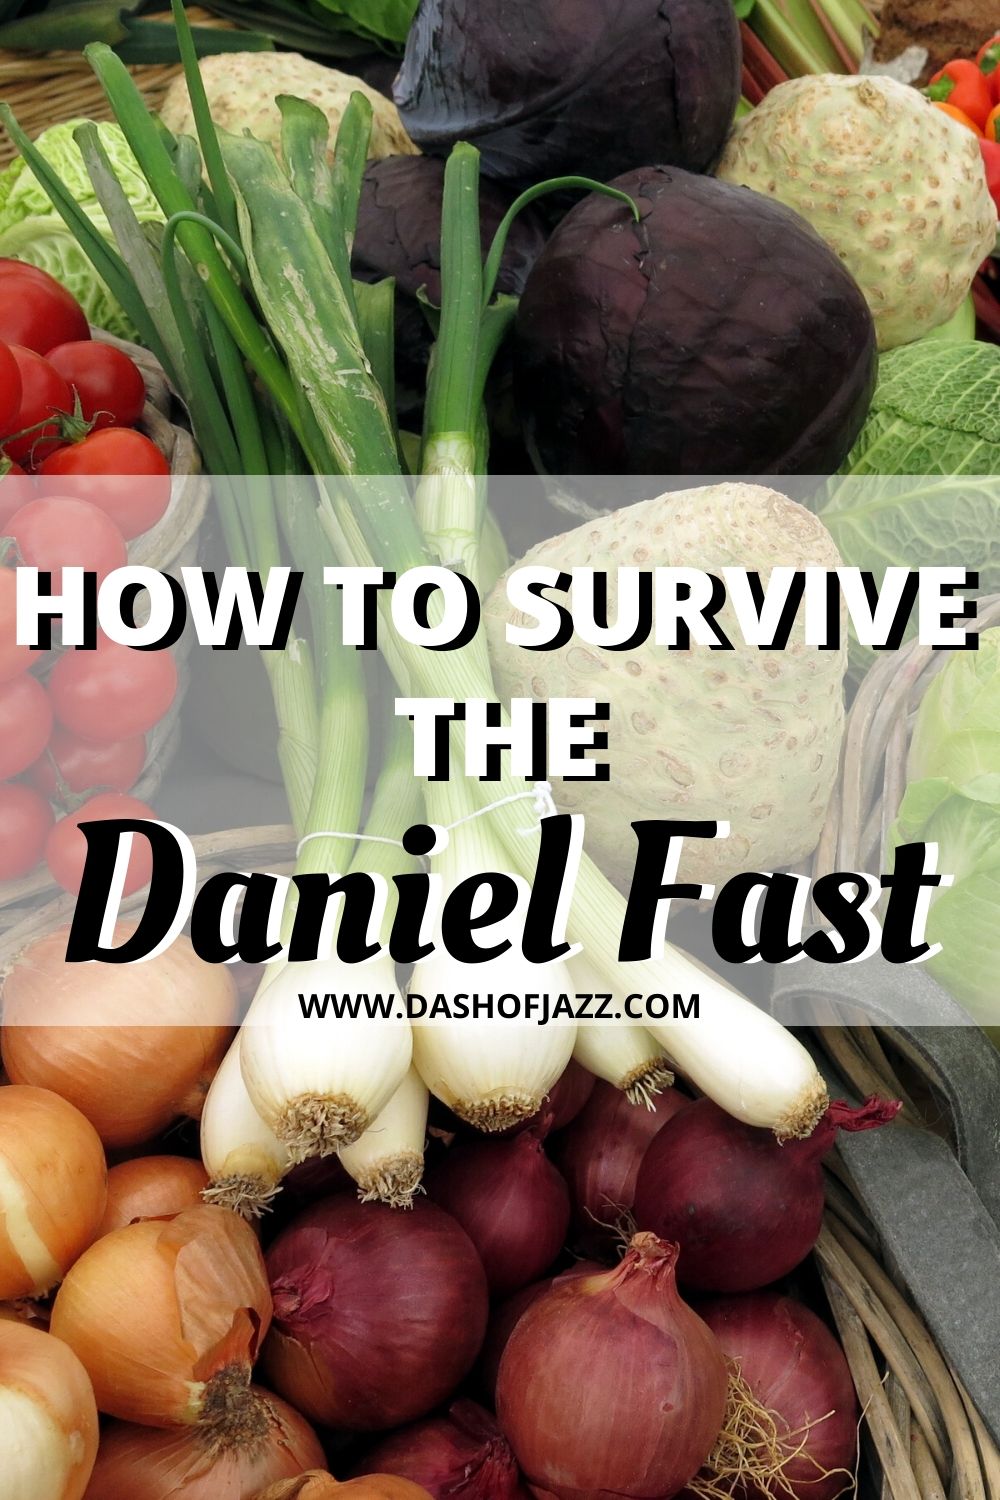 baskets of produce with text overlay "how to survive the daniel fast"